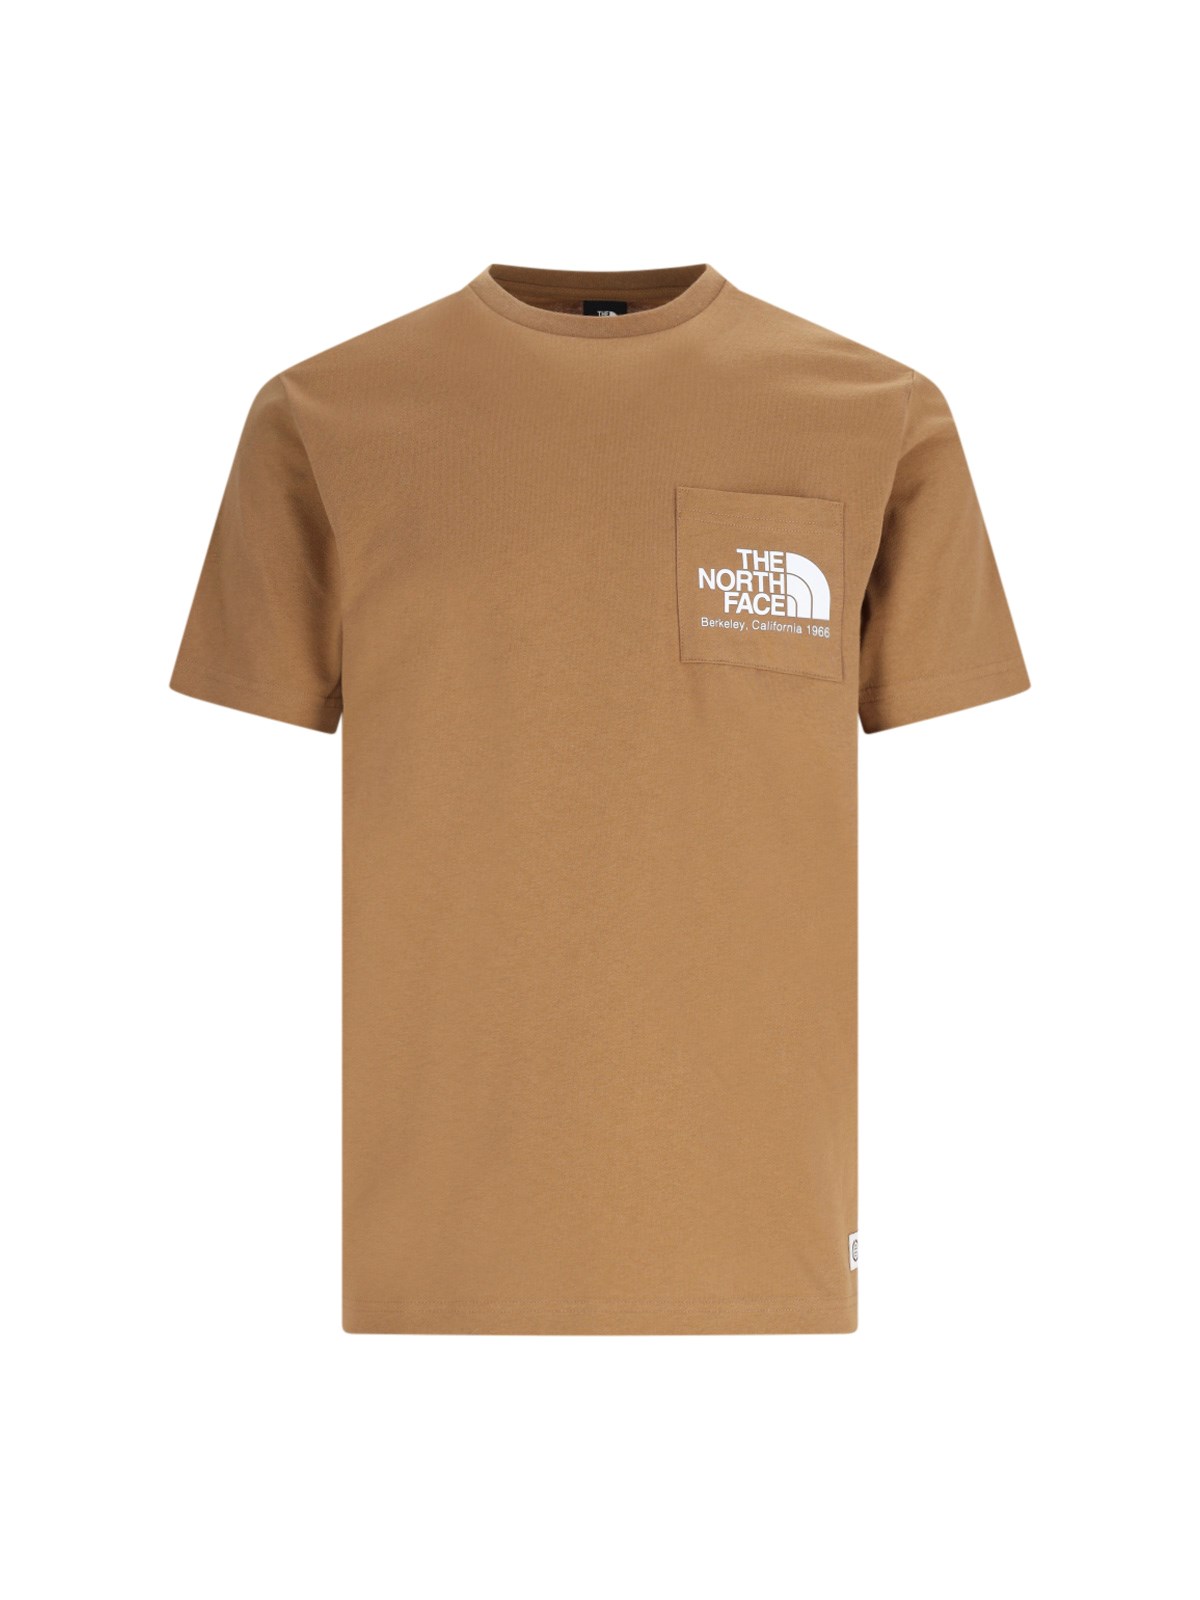 The North Face 'berkley' Pocket T-shirt In Brown